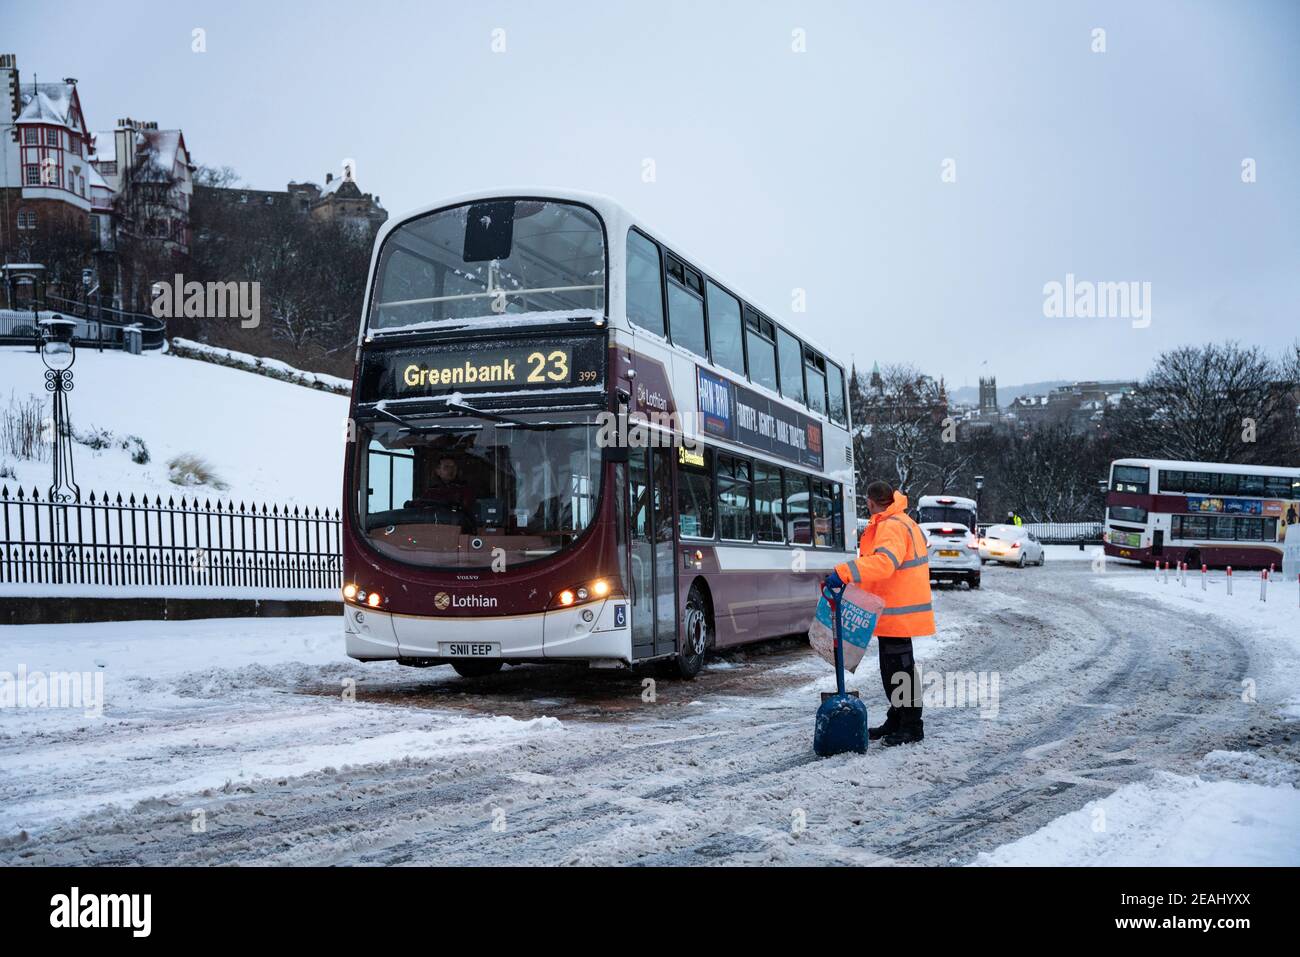 Edinburgh, Scotland, UK. 10 Feb 2021. Big freeze continues in the UK with heavy overnight and morning snow bringing traffic to a standstill on many roads in the city centre. Pic; Bus is freed from snow and slowly drives up The Mound.   Iain Masterton/Alamy Live news Stock Photo